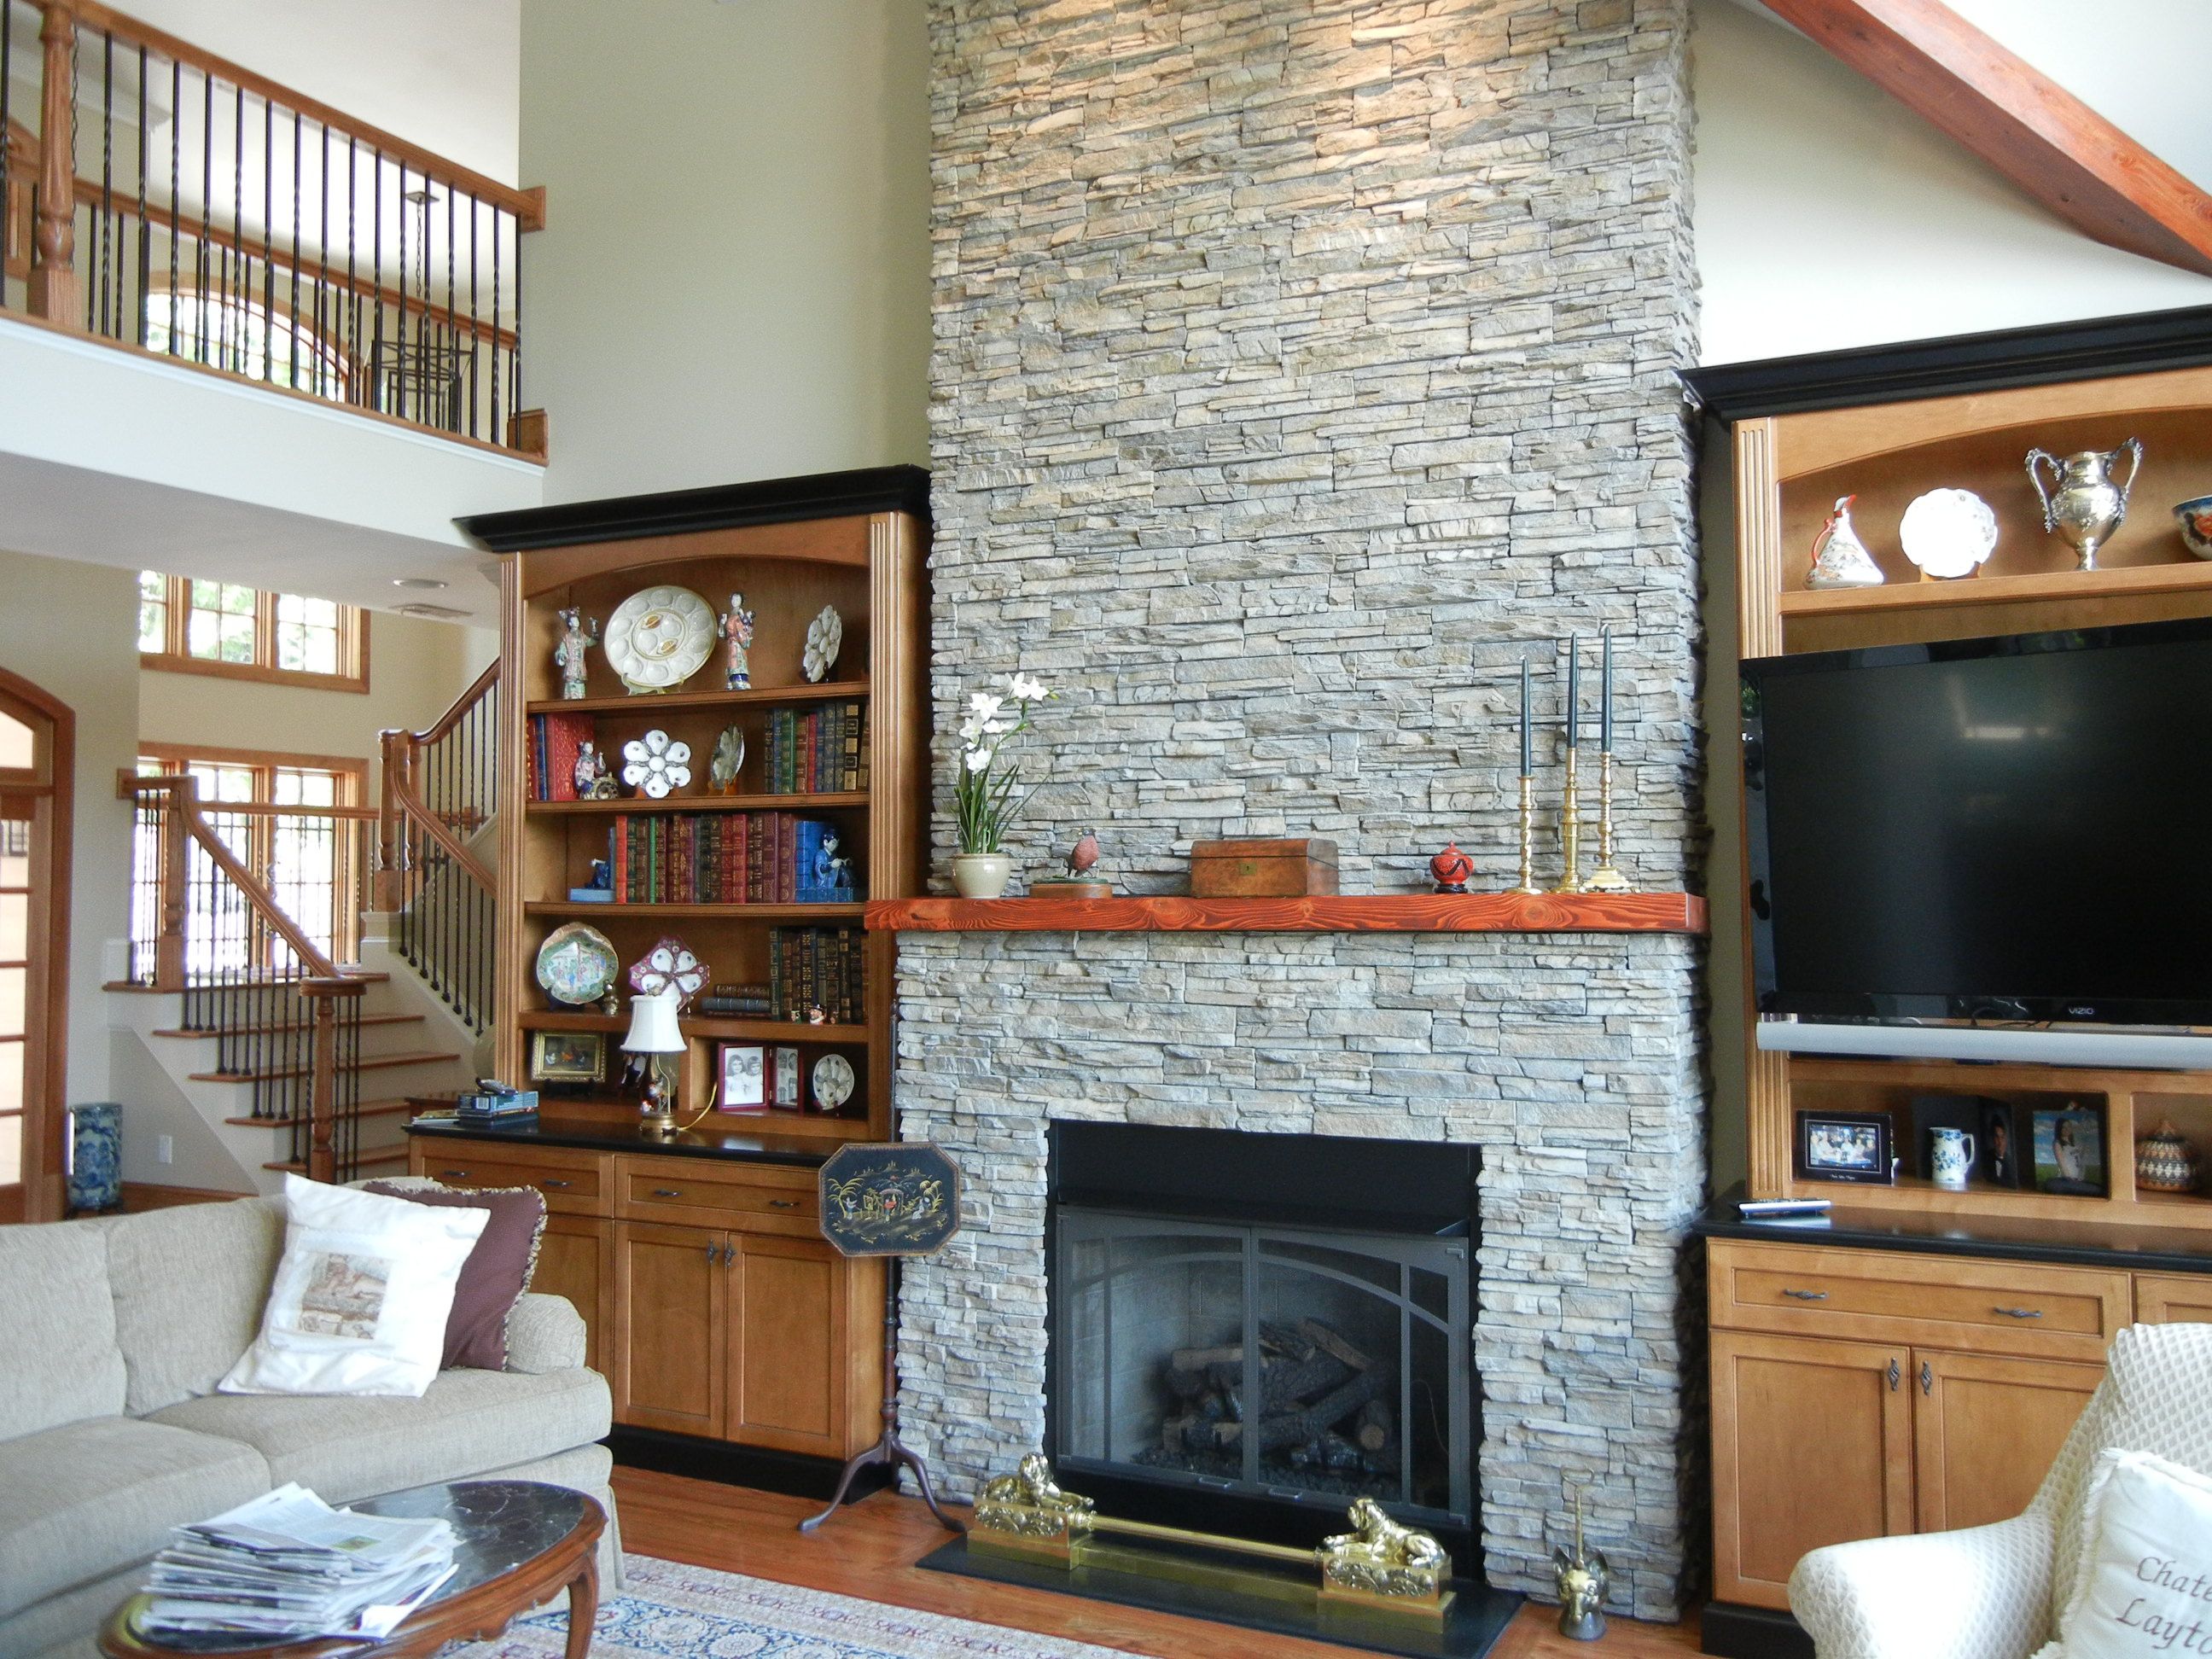 Images Of Stone Fireplaces Lovely Stone Fireplace Surrounded by Built In Bookshelves Creates A